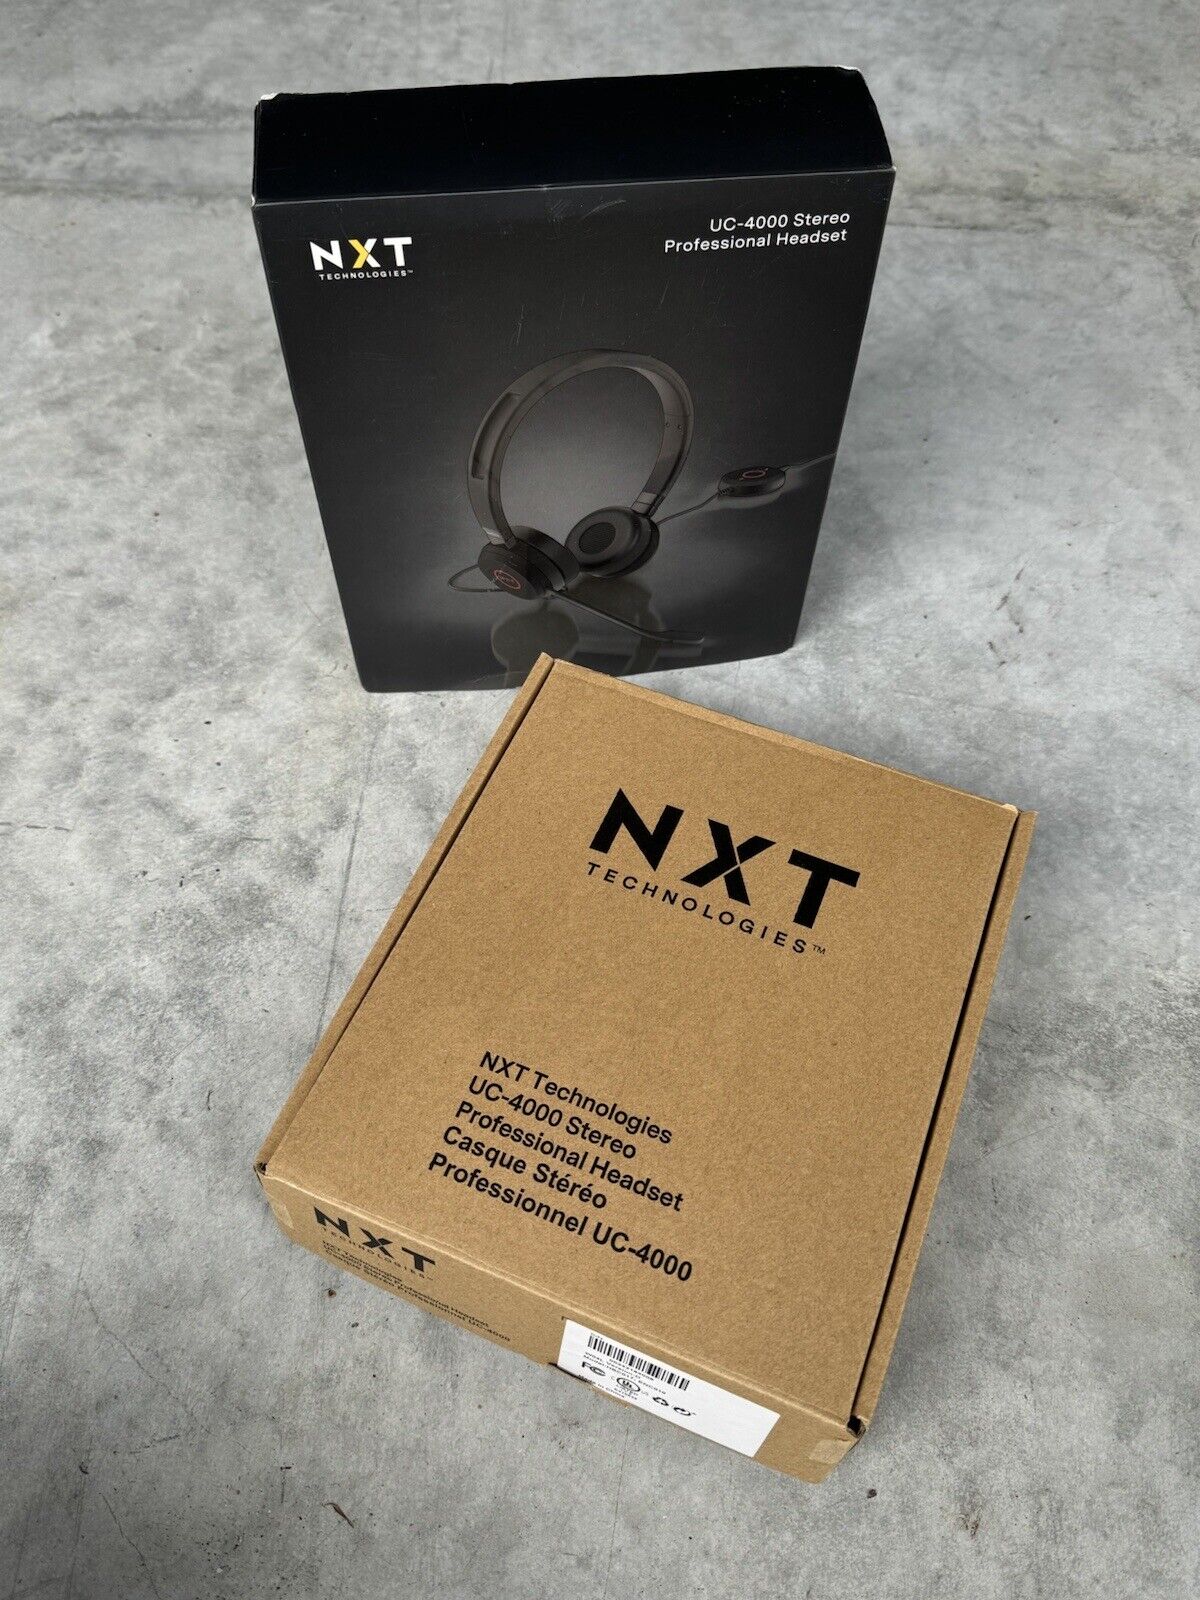 NXT Technologies UC-4000 Stereo Professional Headset - Brand New